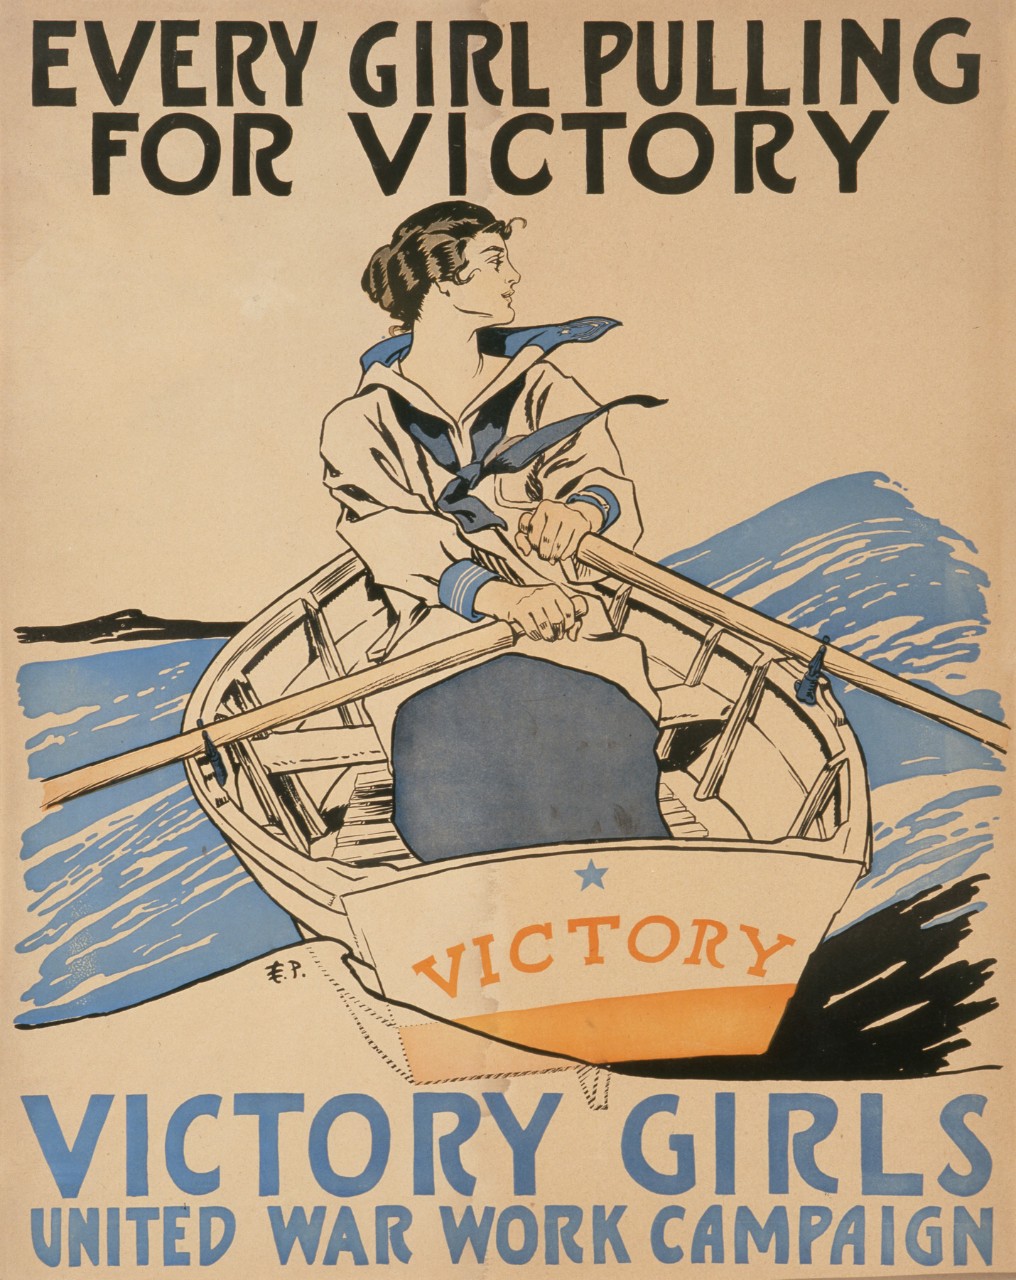 Edward Penfield, 1917.   “Every Girl Pulling for Victory, 1918”